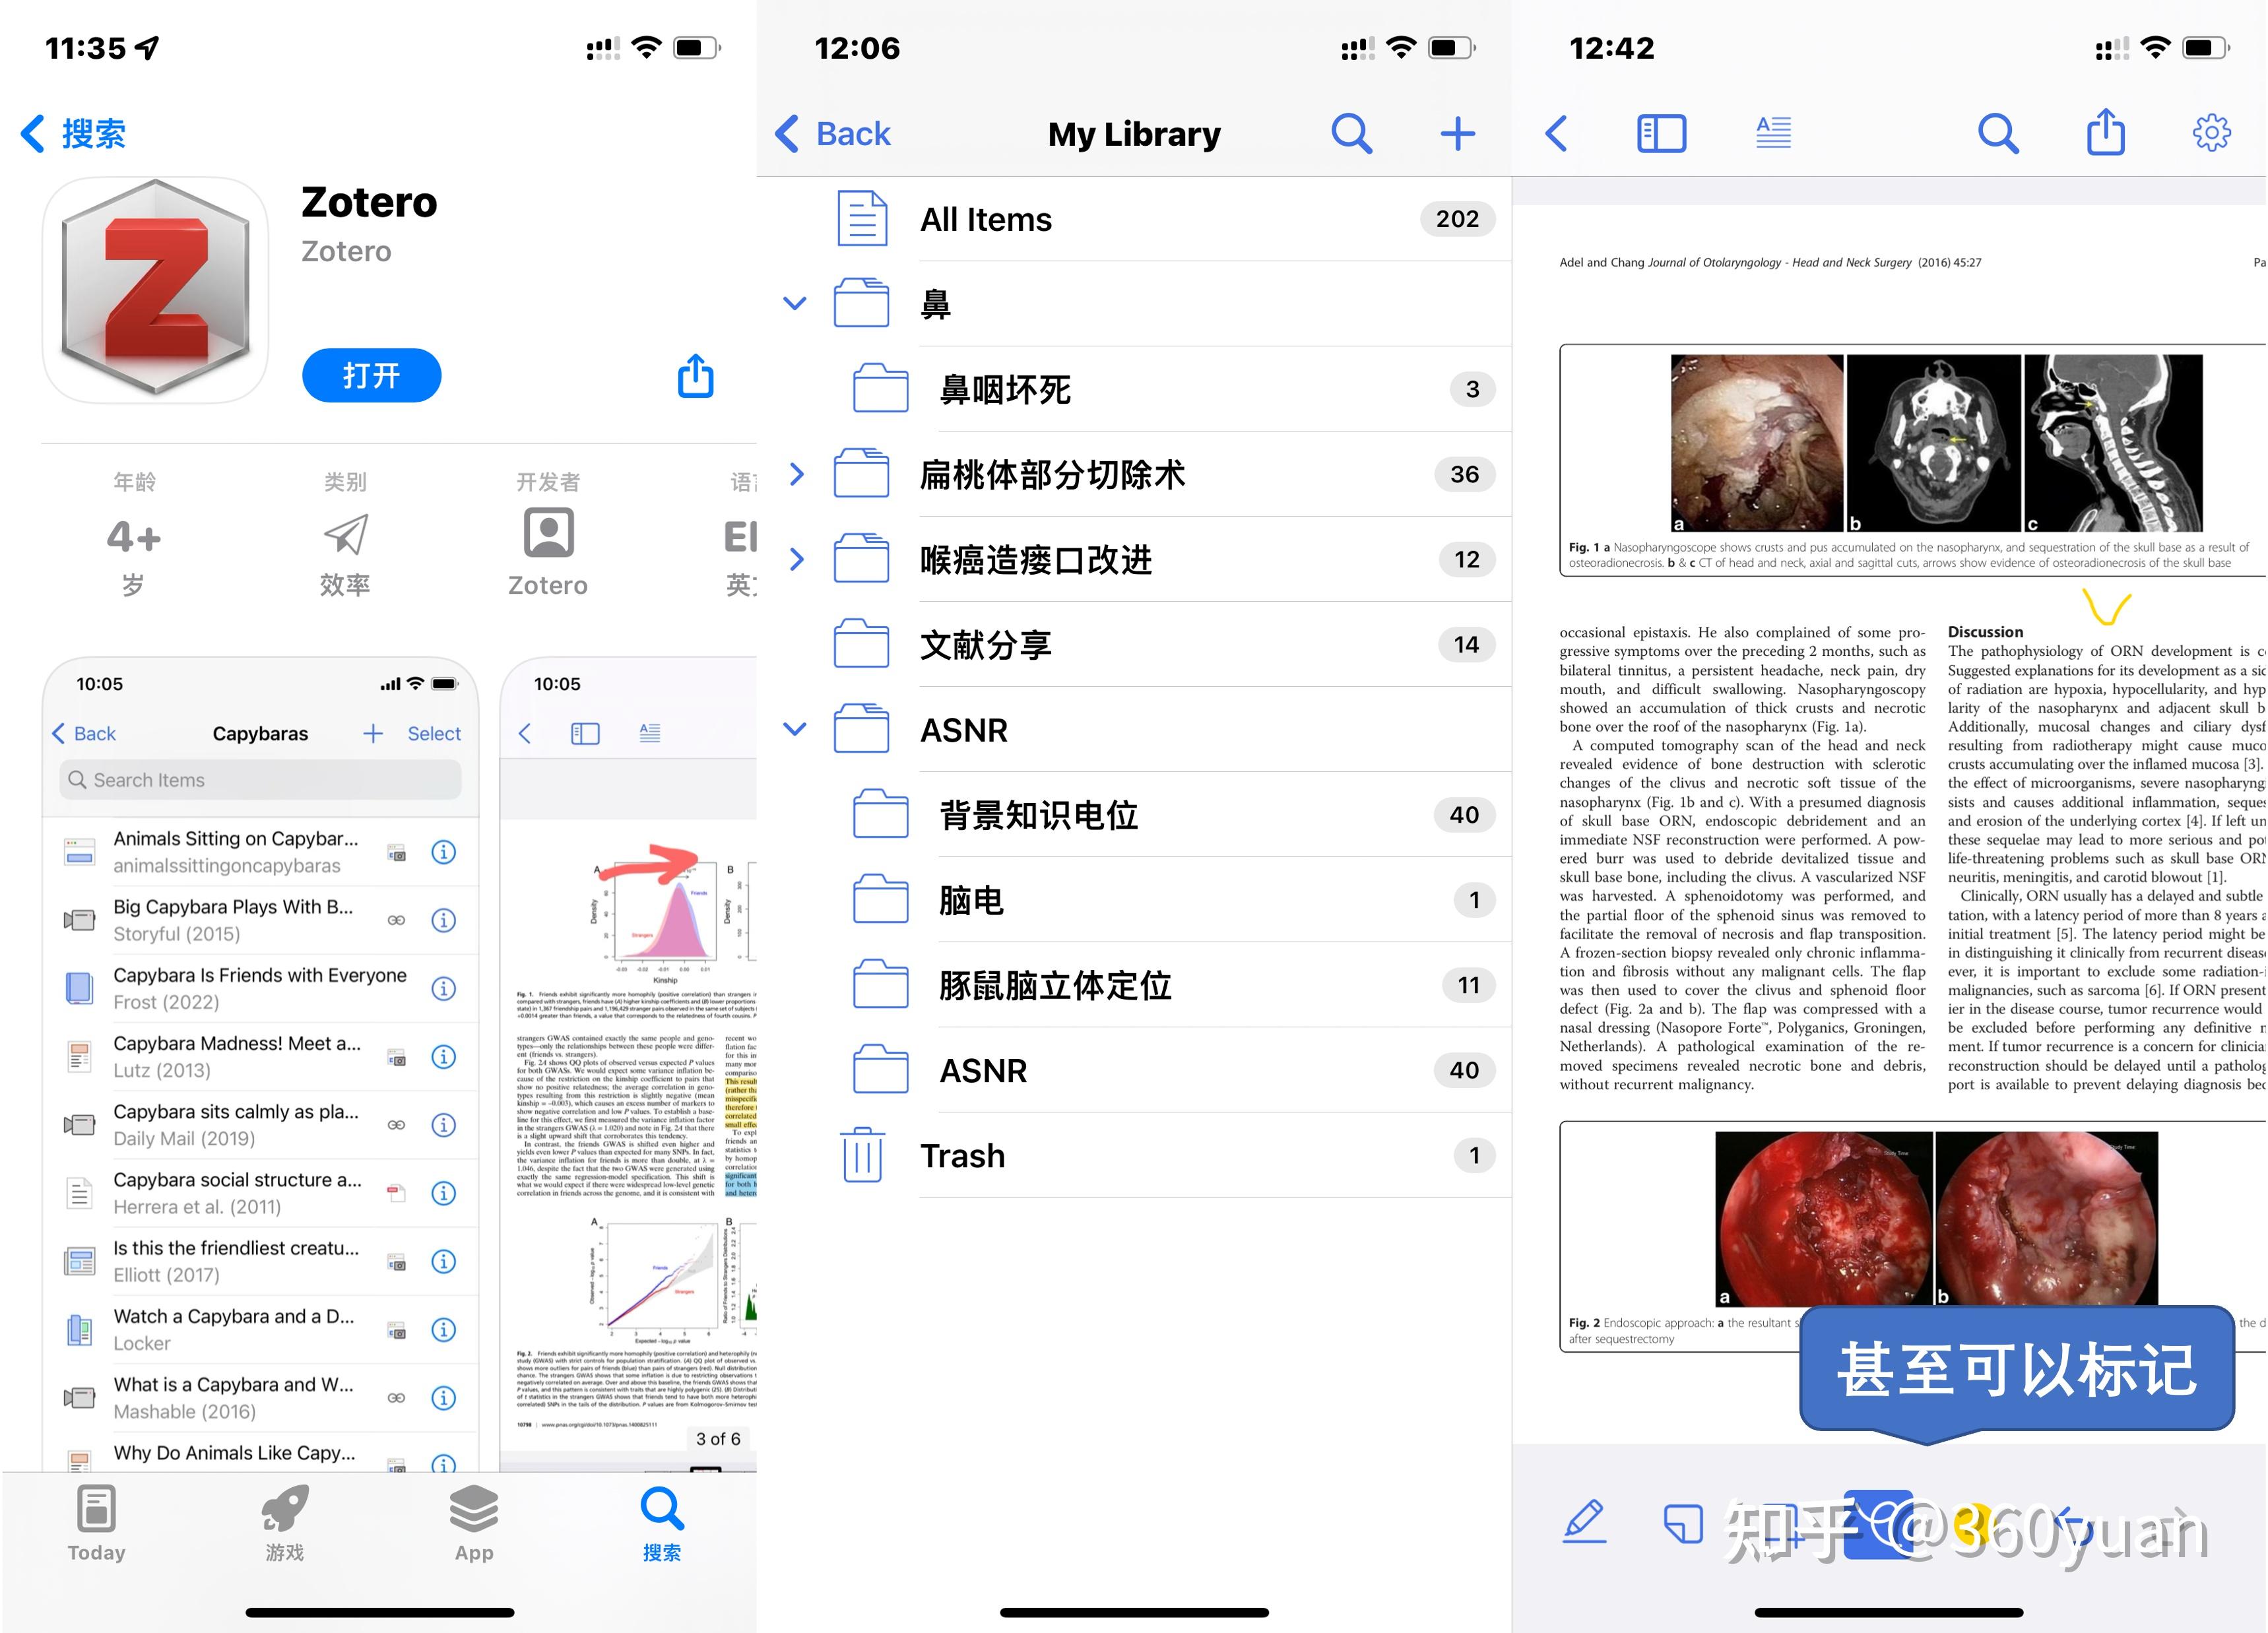 download the last version for iphoneZotero 6.0.27